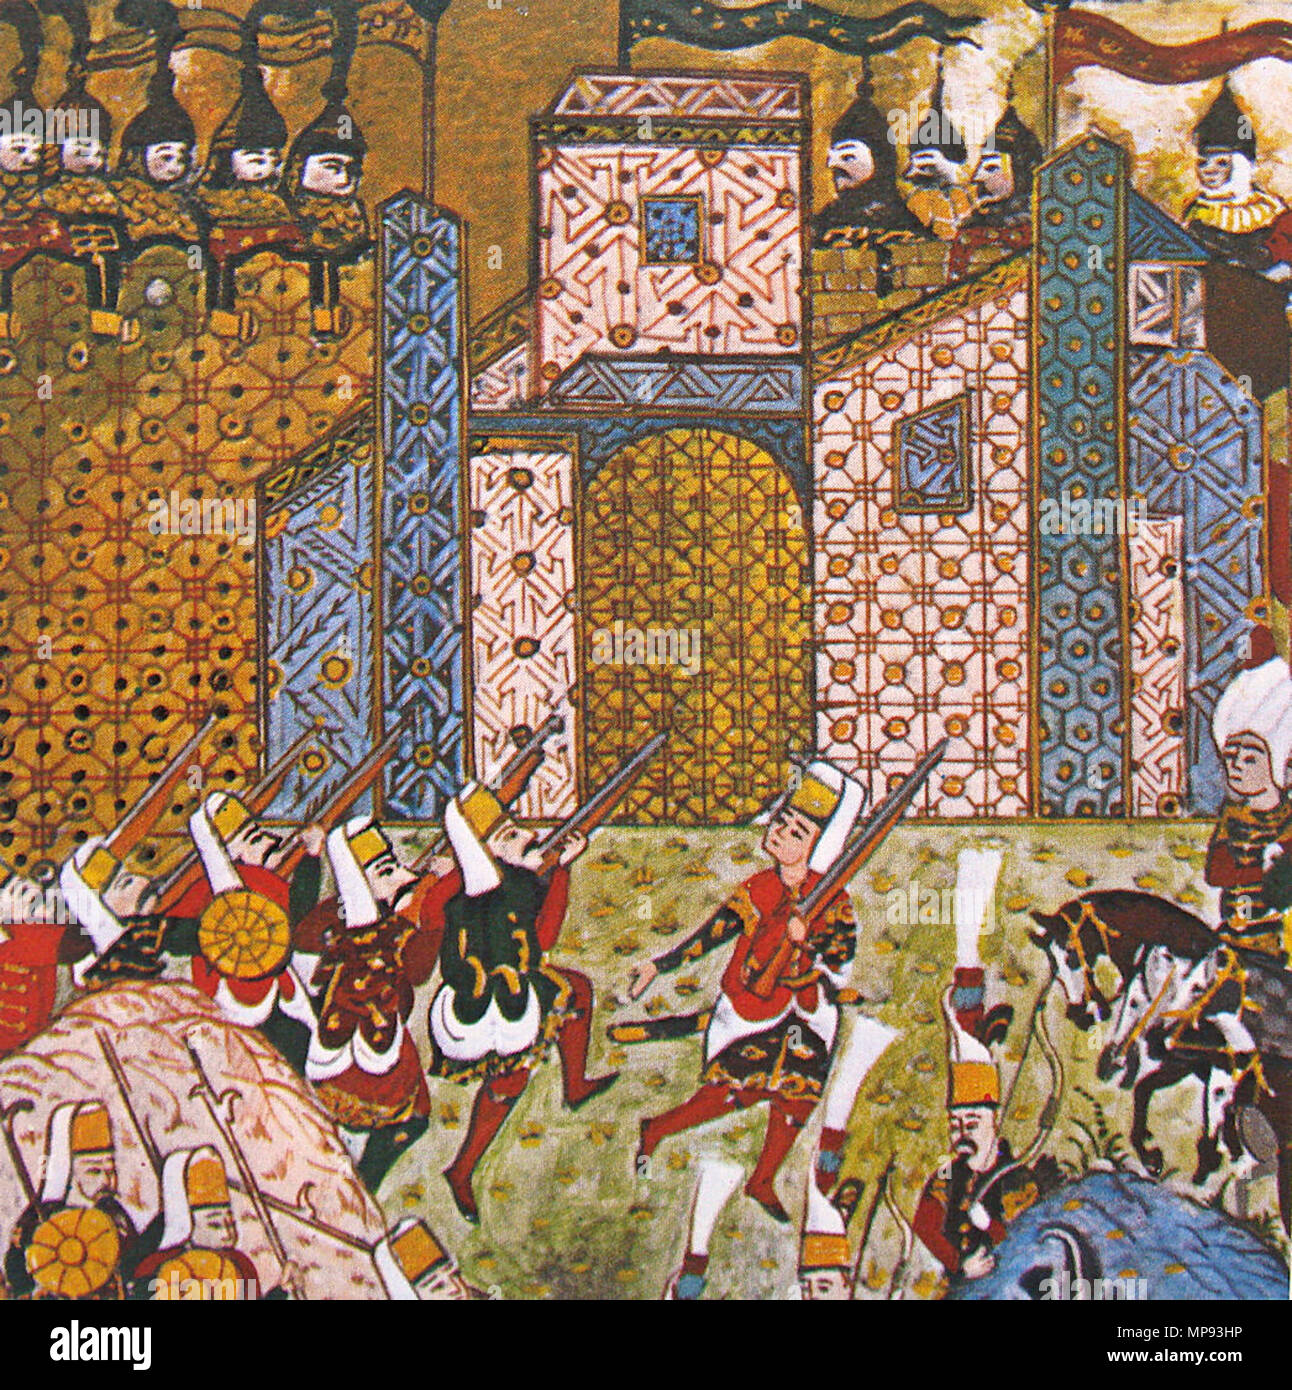 . English: Ottoman Janissaries and the defending Knights of St. John, Siege of Rhodes (1522) . 1558. Fethullah Çelebi Arifi (historian, poet and painter) and/or Matrakçı Nasuh (painter of landscape) and/or other painters at the court of Sultan Suleiman the Magnificent 950 OttomanJanissariesAndDefendingKnightsOfStJohnSiegeOfRhodes1522 Stock Photo